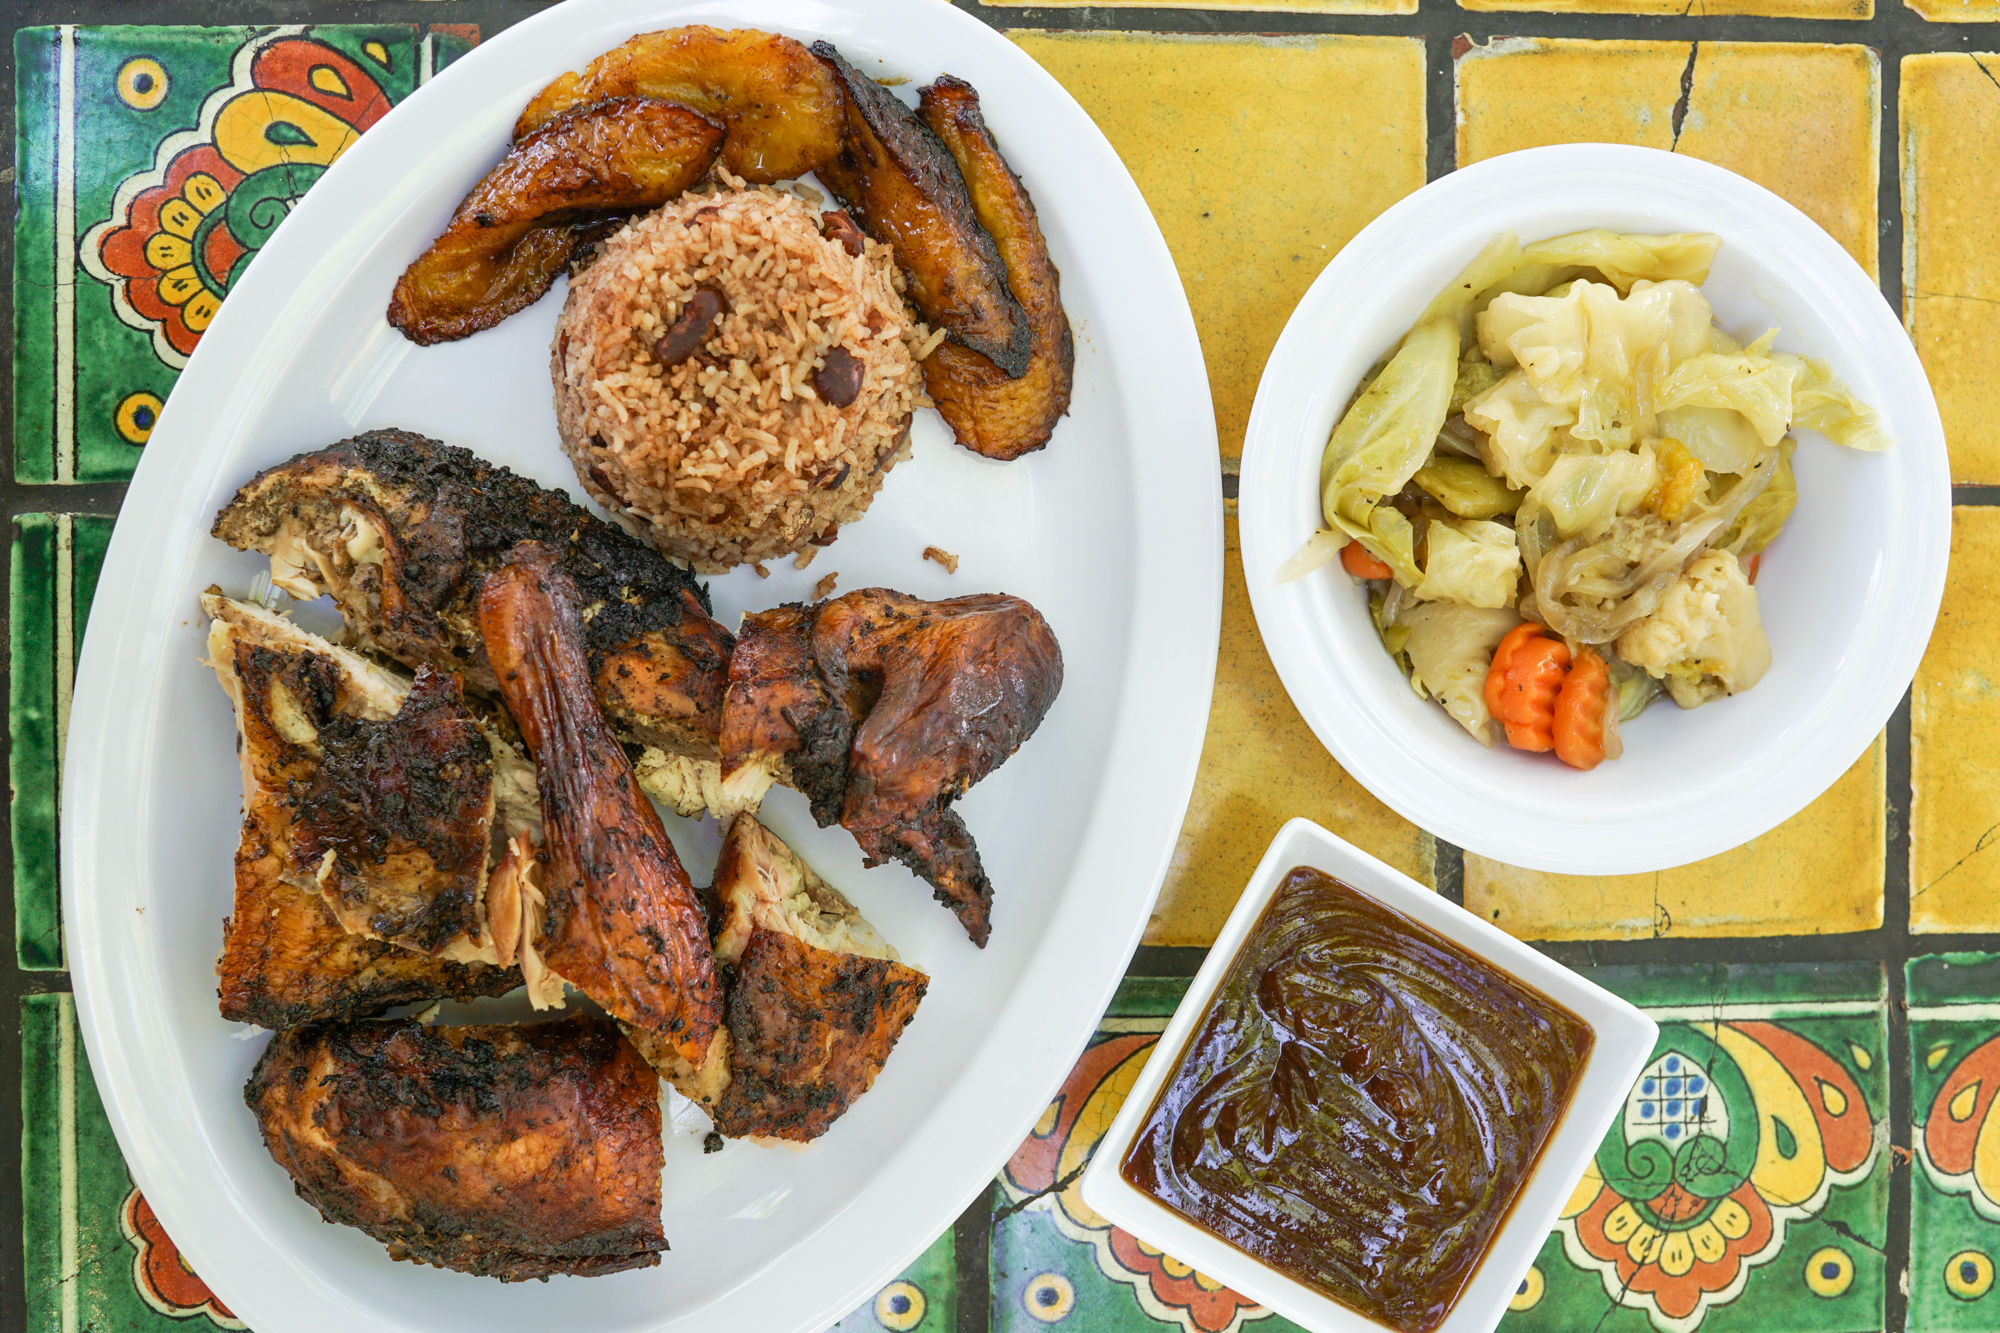 Plate of browned chicken with sides on a tiled table.